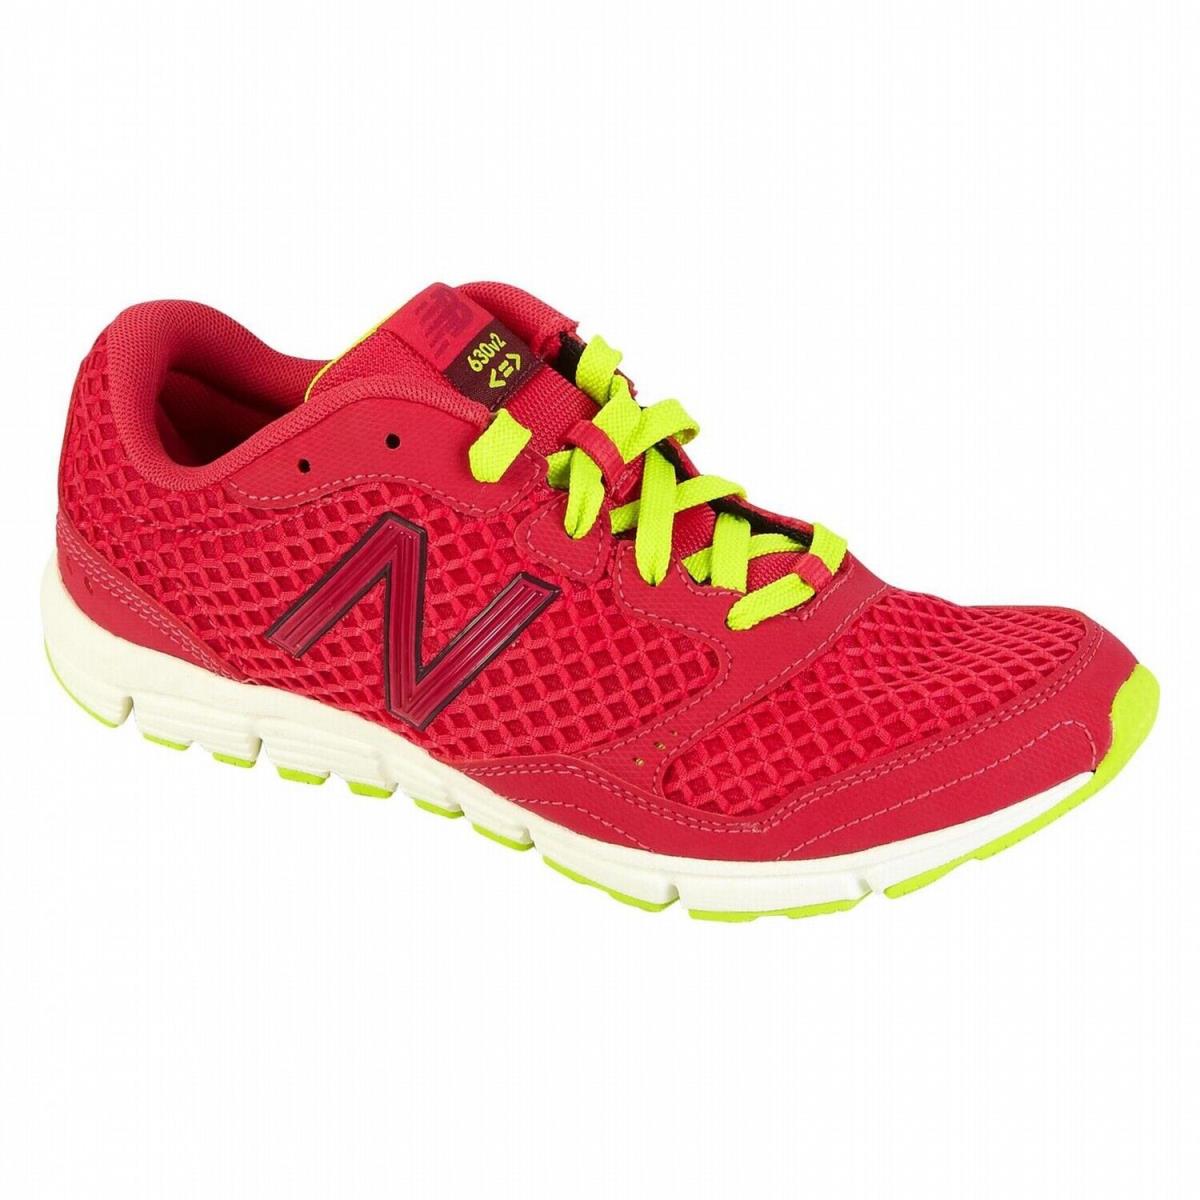 New Balance shoes  - Pink/Green 4